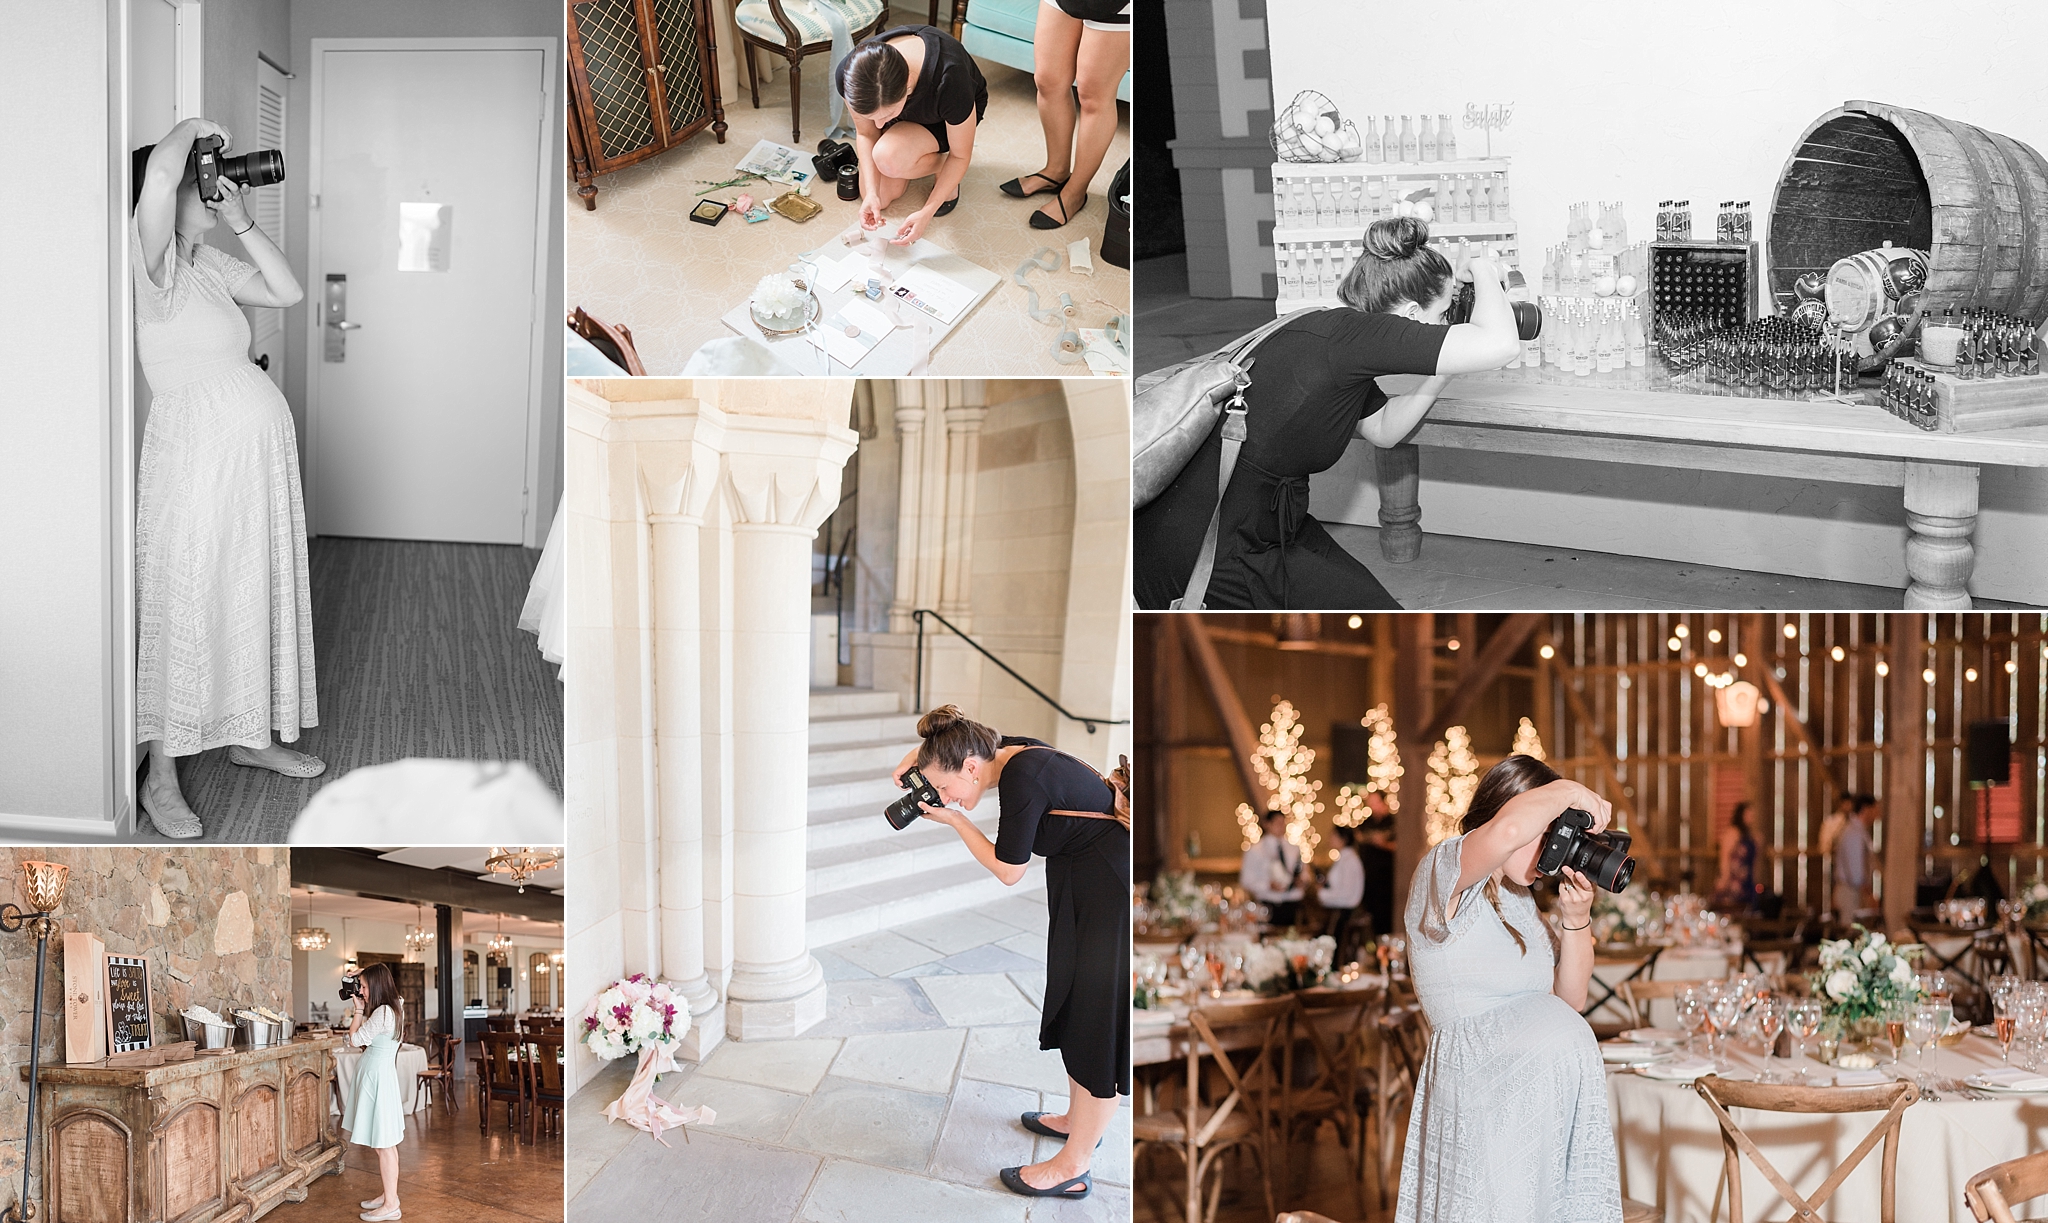 Go behind the scenes during the epic 2017 season with this Washington, DC wedding photographer to see all the fun that takes place on a client's big day!